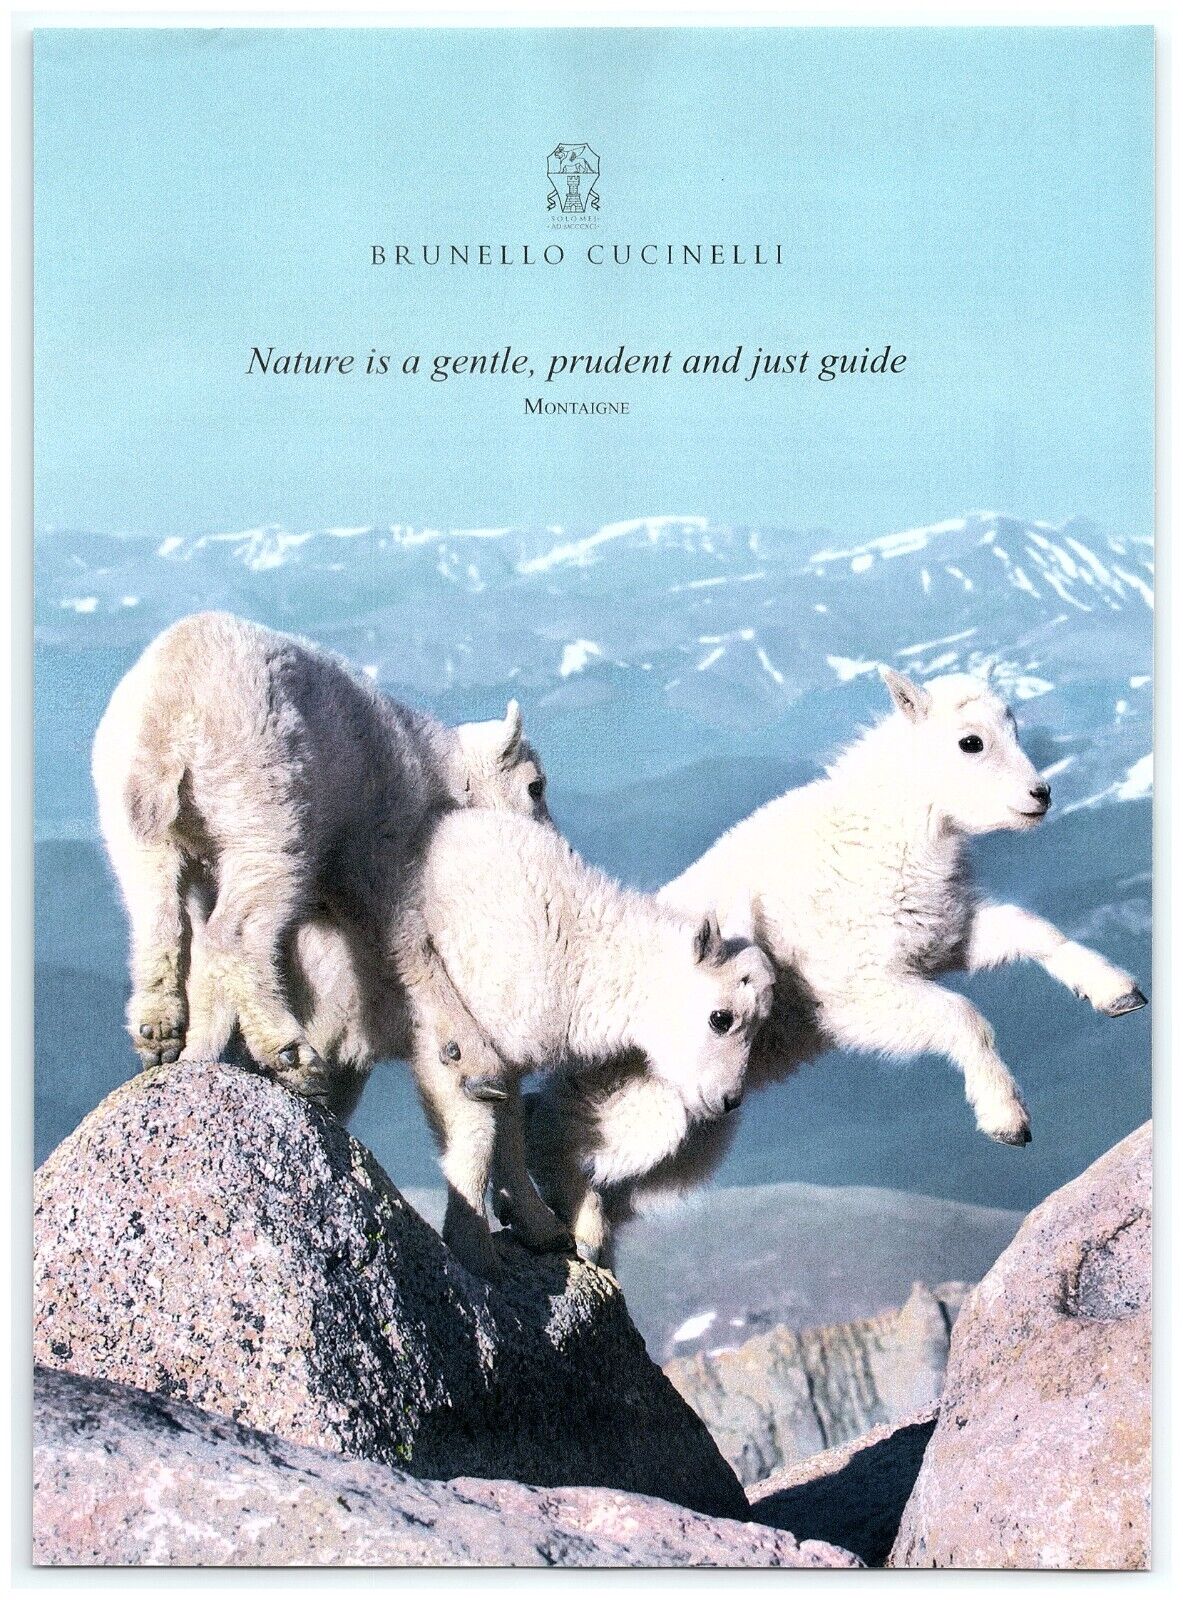 2021 Brunello Cucinelli Print Ad, Nature Gentle Guide Baby Mountain Goats Cliff